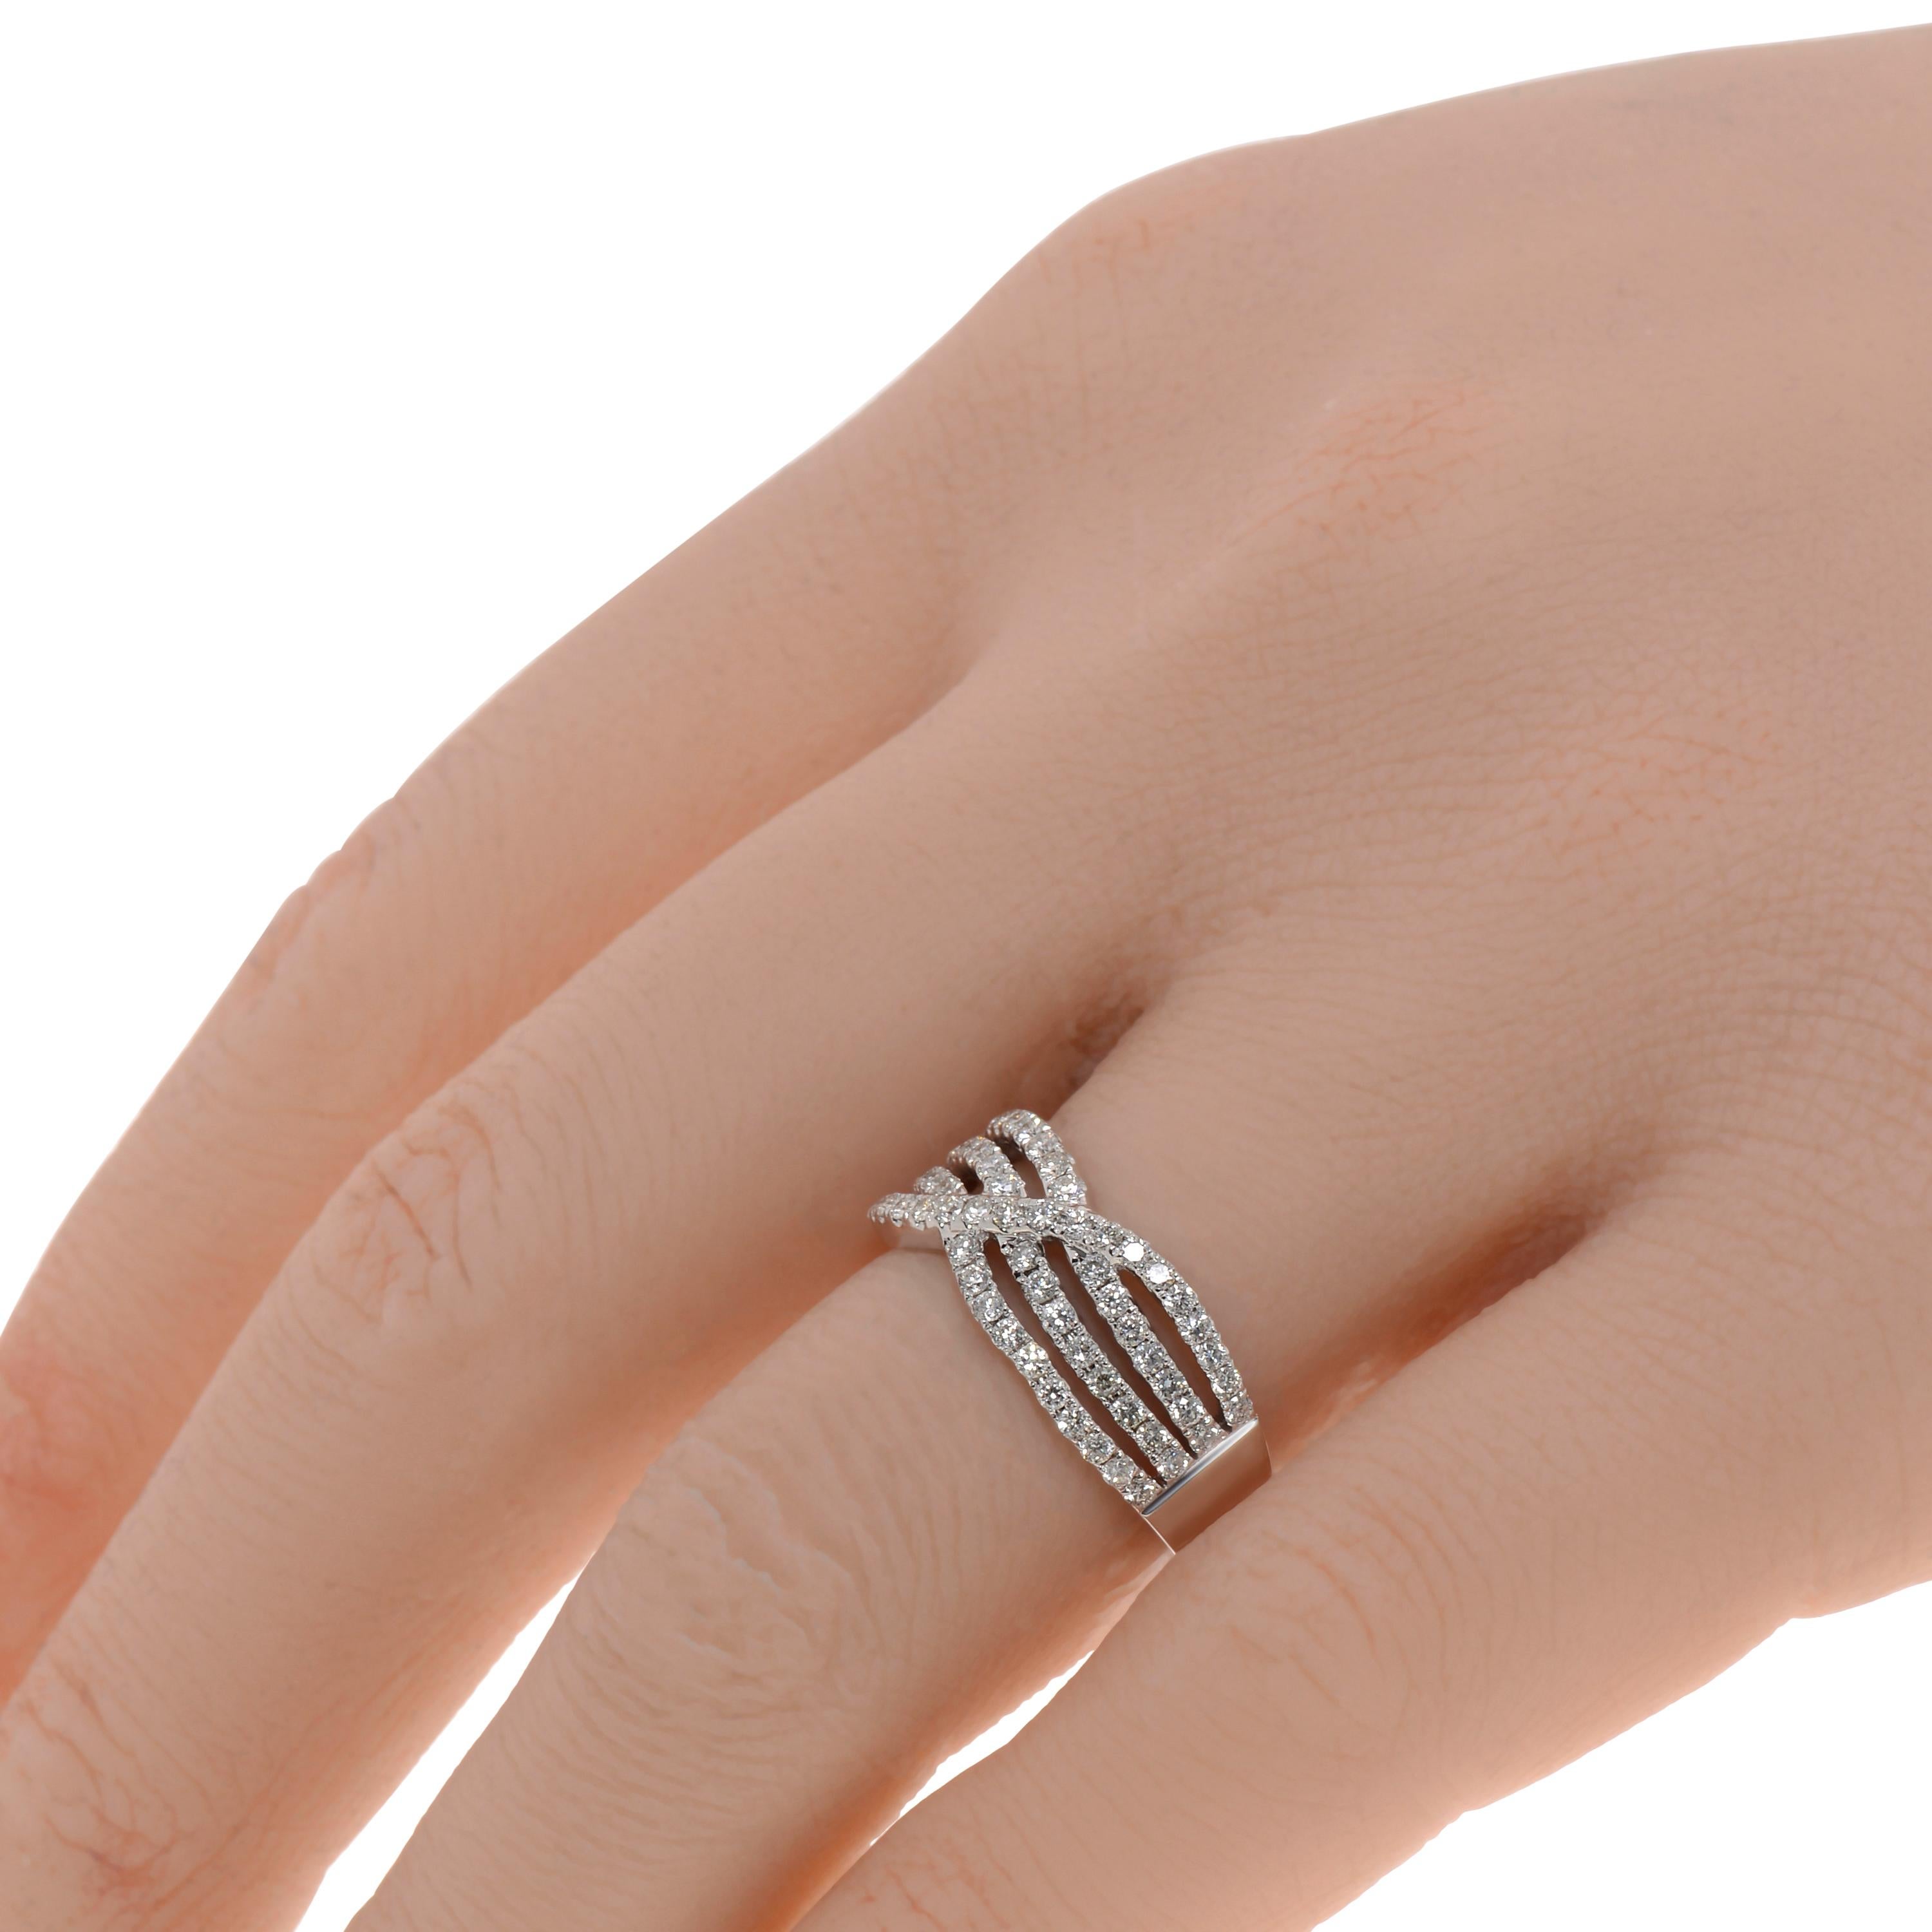 This graceful Piero Milano 18K White Gold Highway Ring features a waved diamond strand overlapping three glittering layers of diamond pave 0.71ct. tw. The ring size is 5.75 (51.2). The Band Width is 7.7mm. The Weight is 5.9g.
